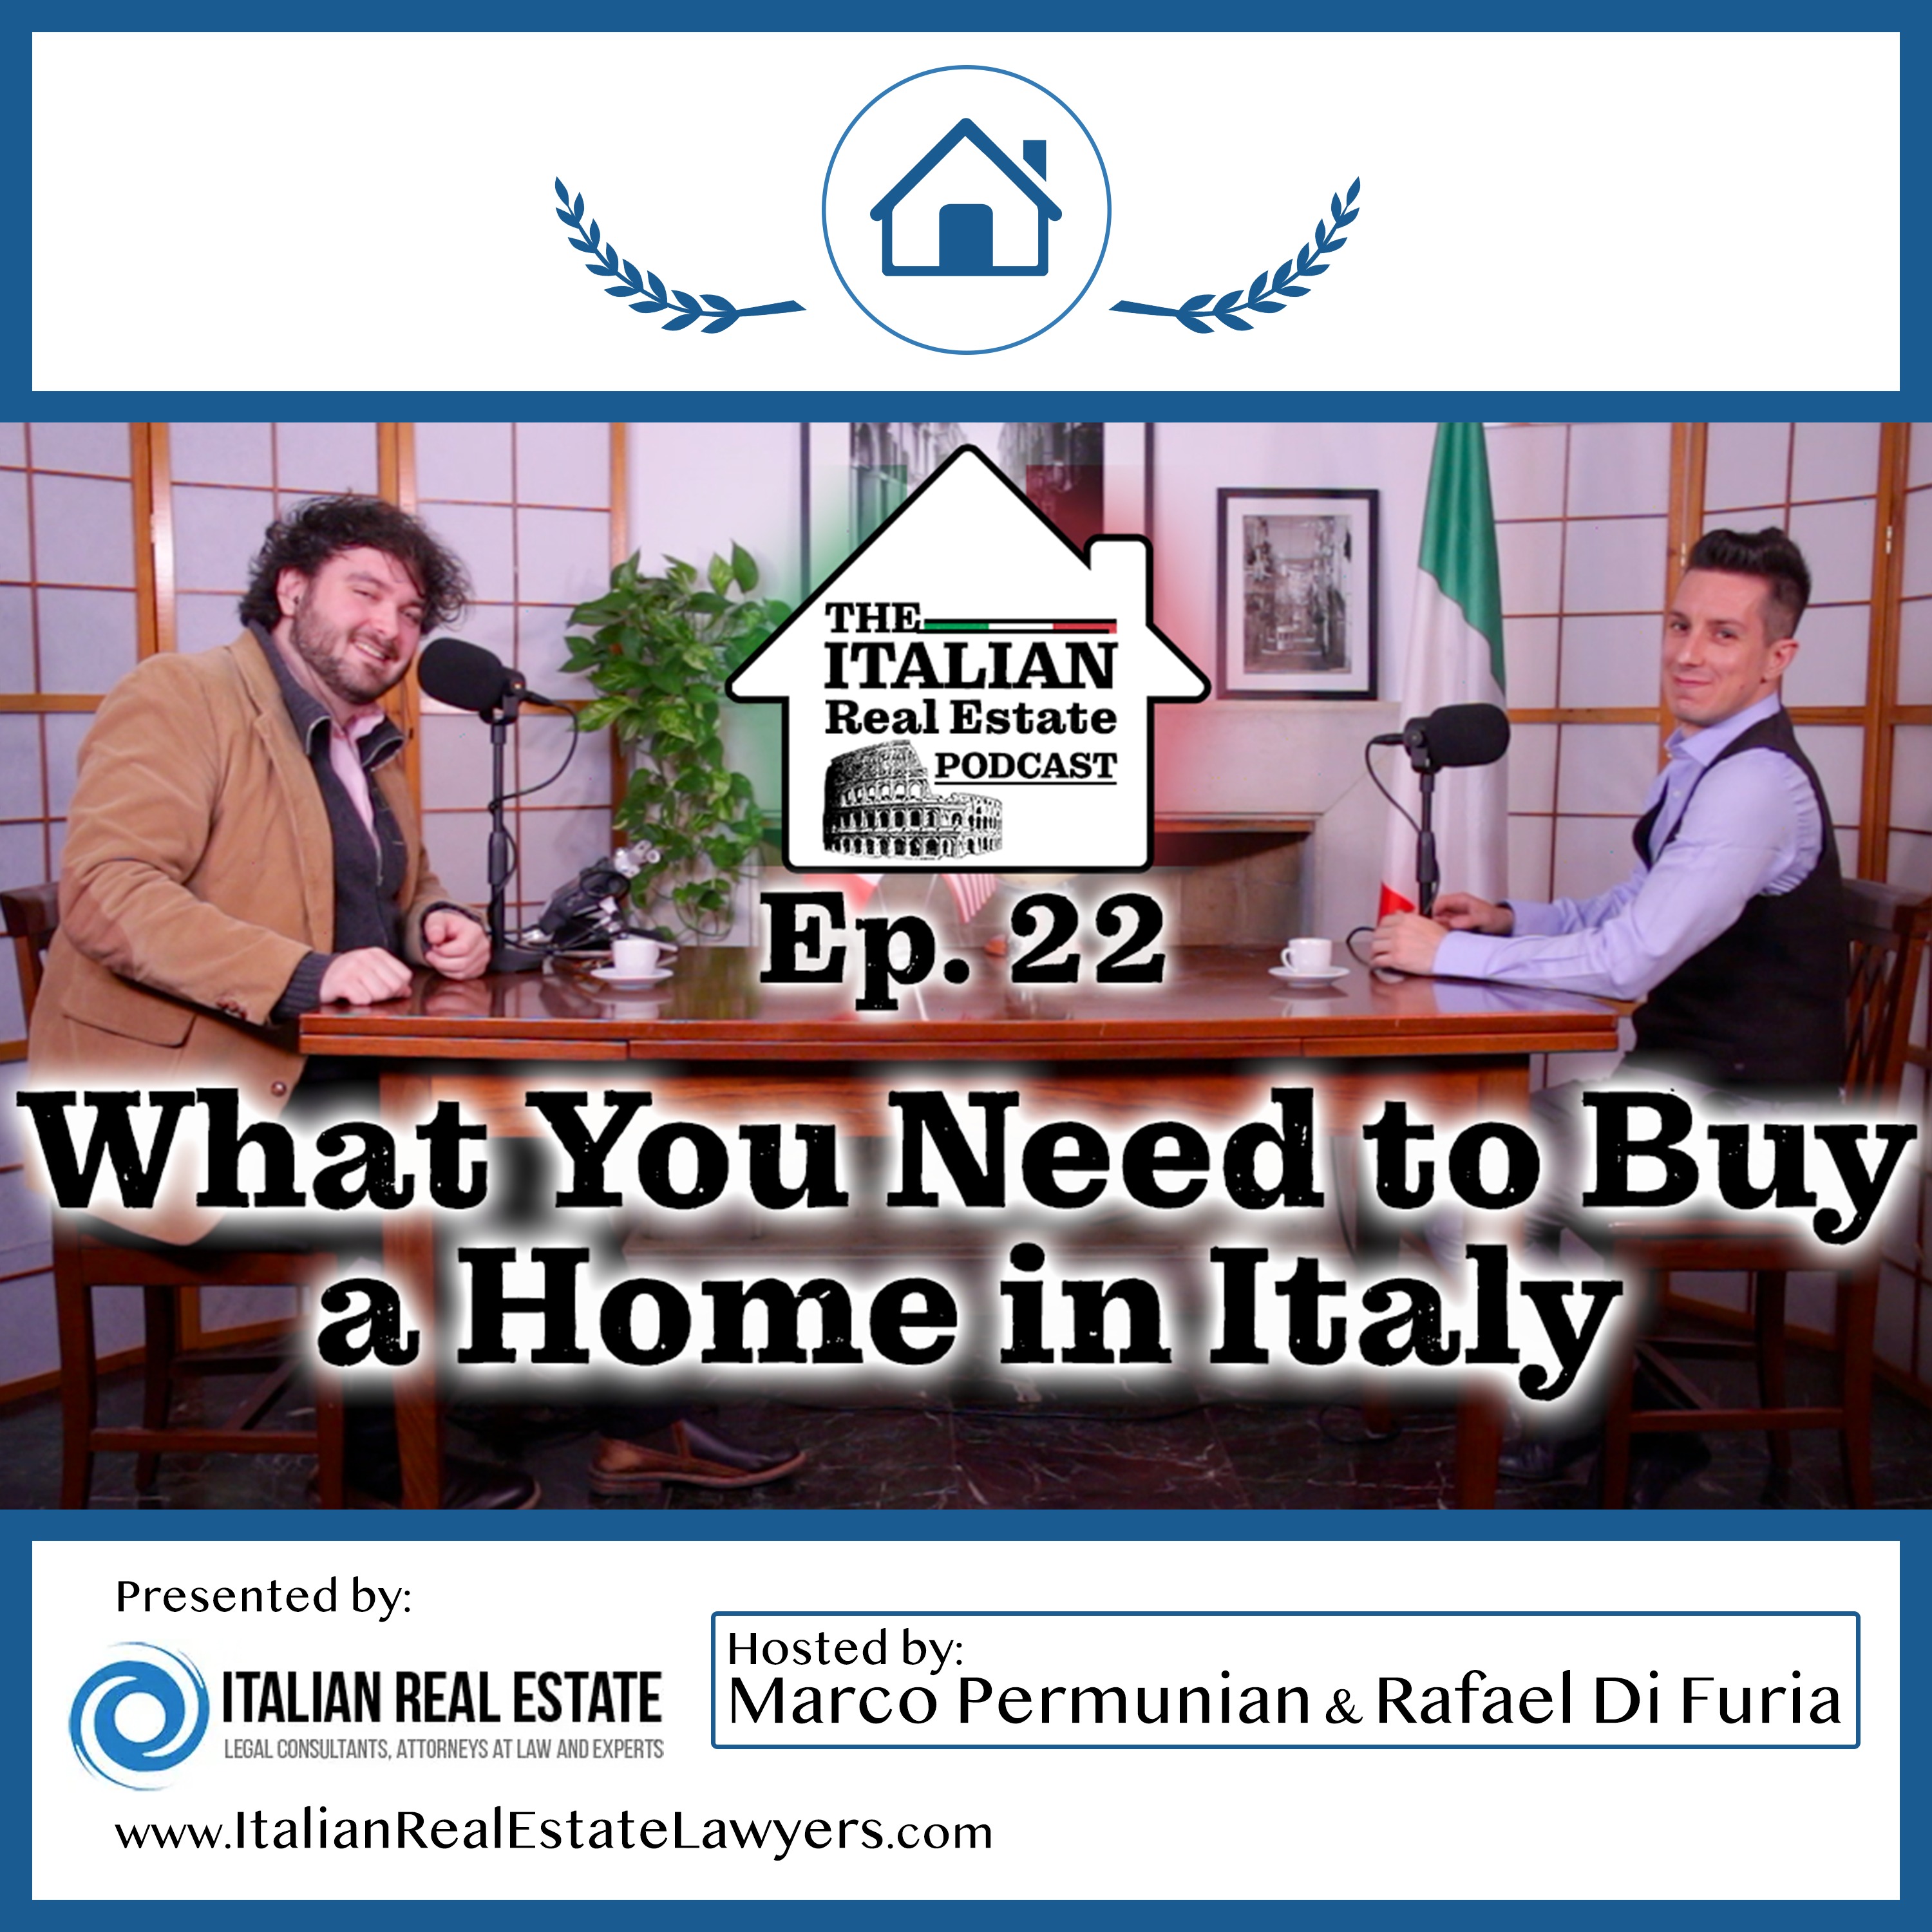 What Do I Need To Buy a Home in Italy?